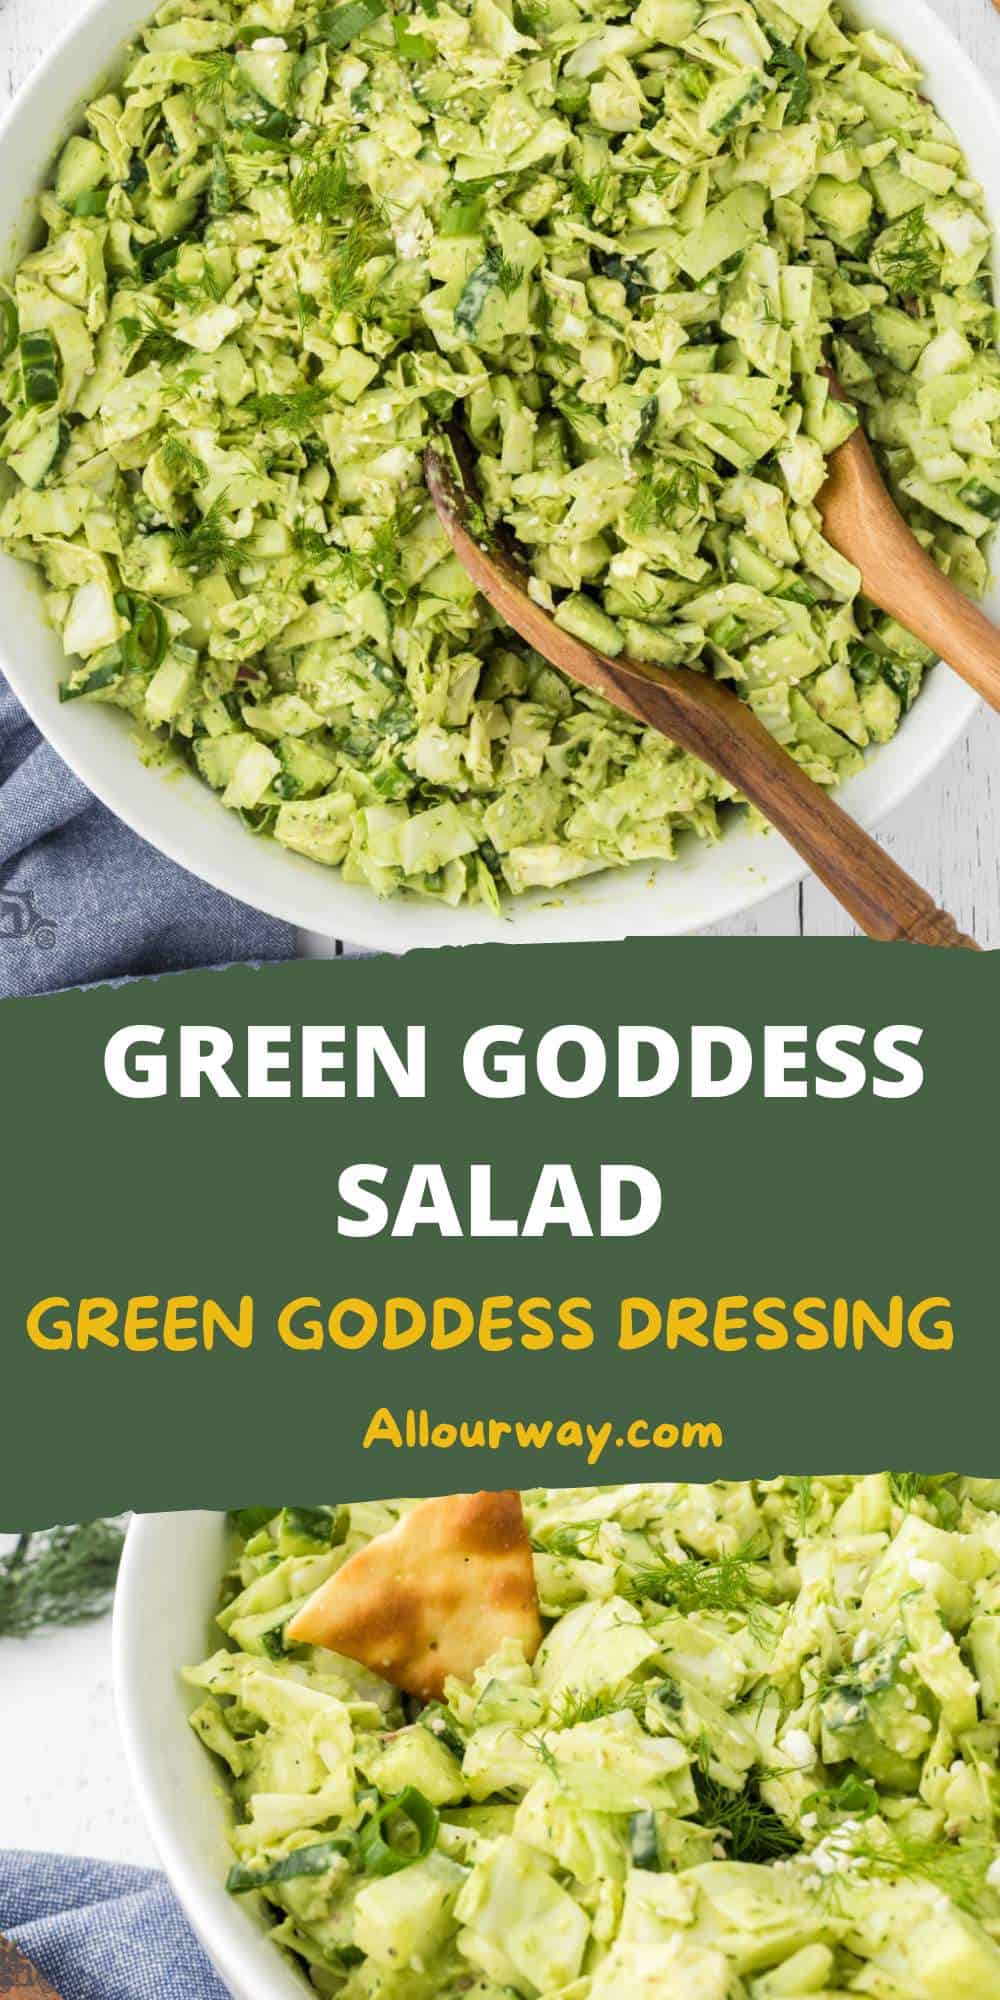 Prepare to be dazzled by the vibrant colors and explosive flavors in the Green Goddess Salad, made with a medley of crisp greens and an absolutely heavenly homemade buttery-tasting dressing that will make your heart skip a beat. This family-favorite salad and dressing will have everyone gobbling their veggies.